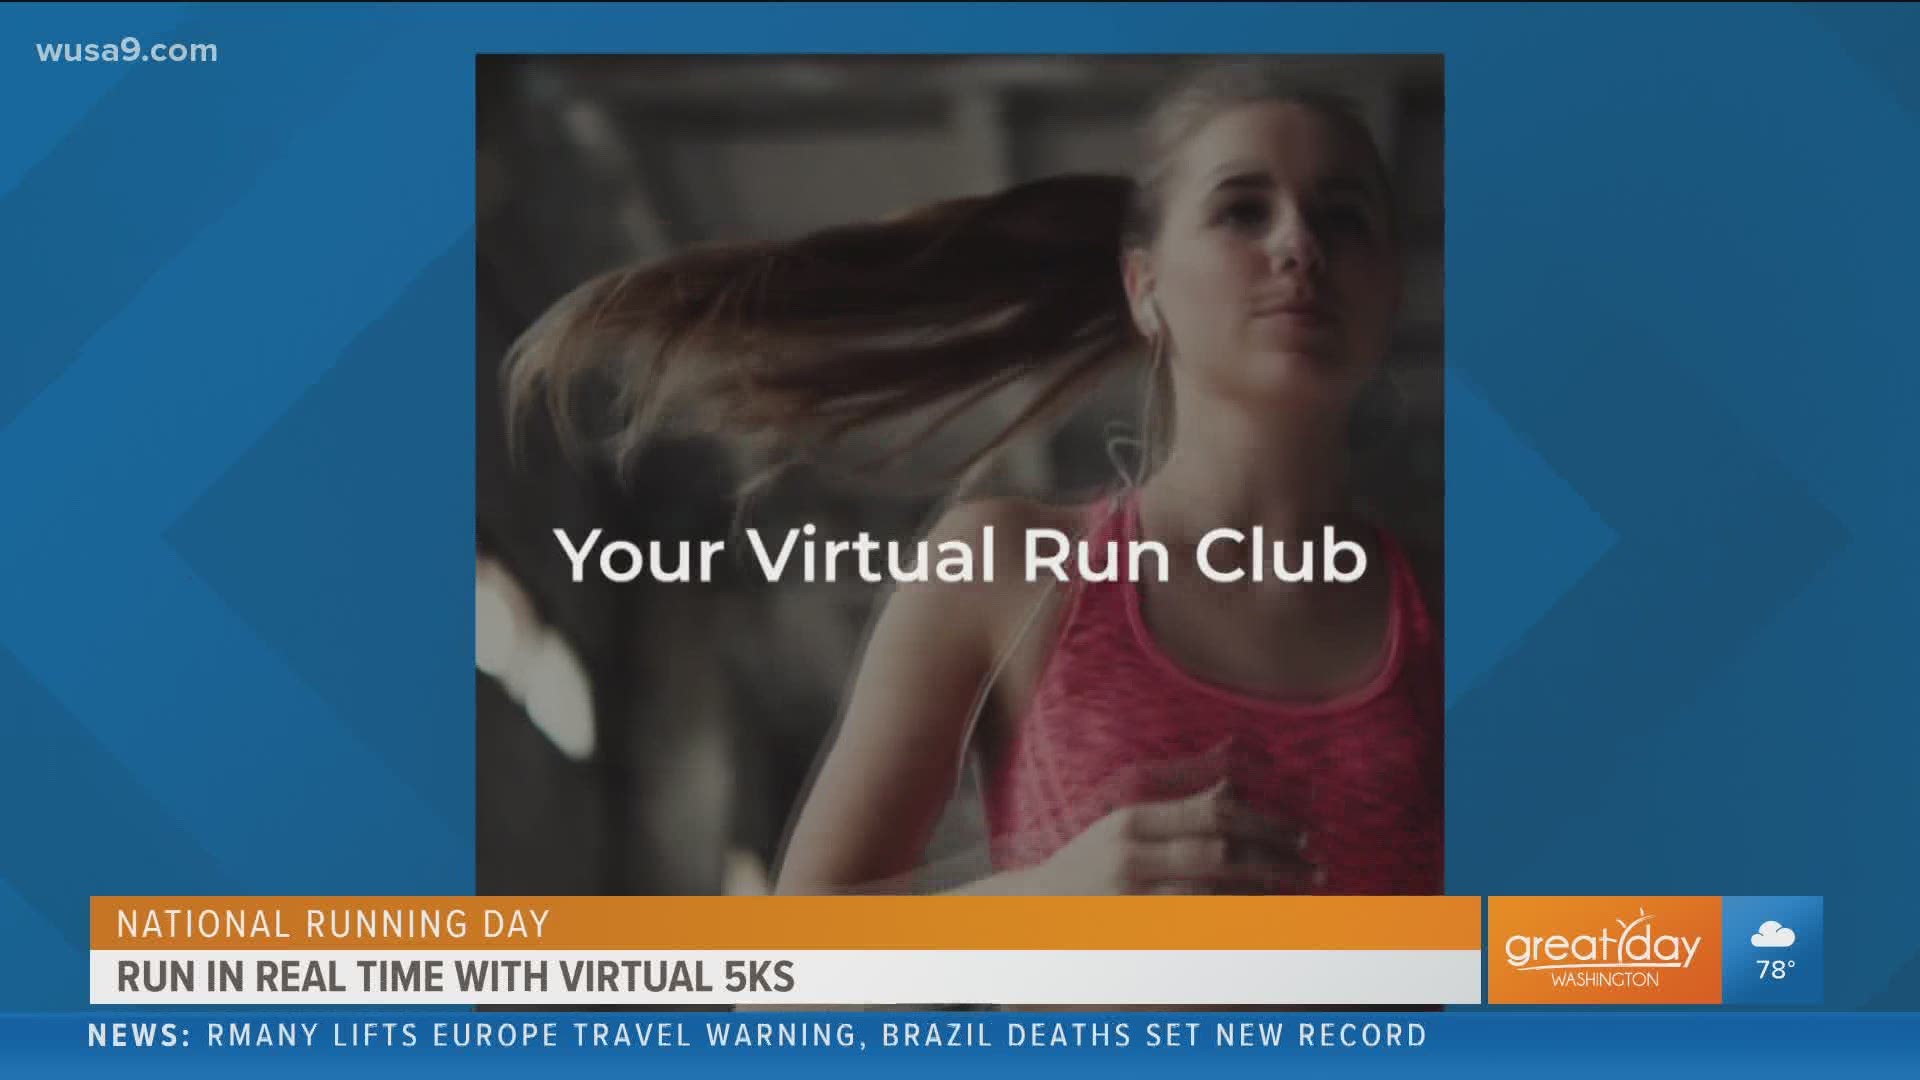 Don't let the canceled running events stop your progress.  Hear about the virtual 5K events that are happening now.